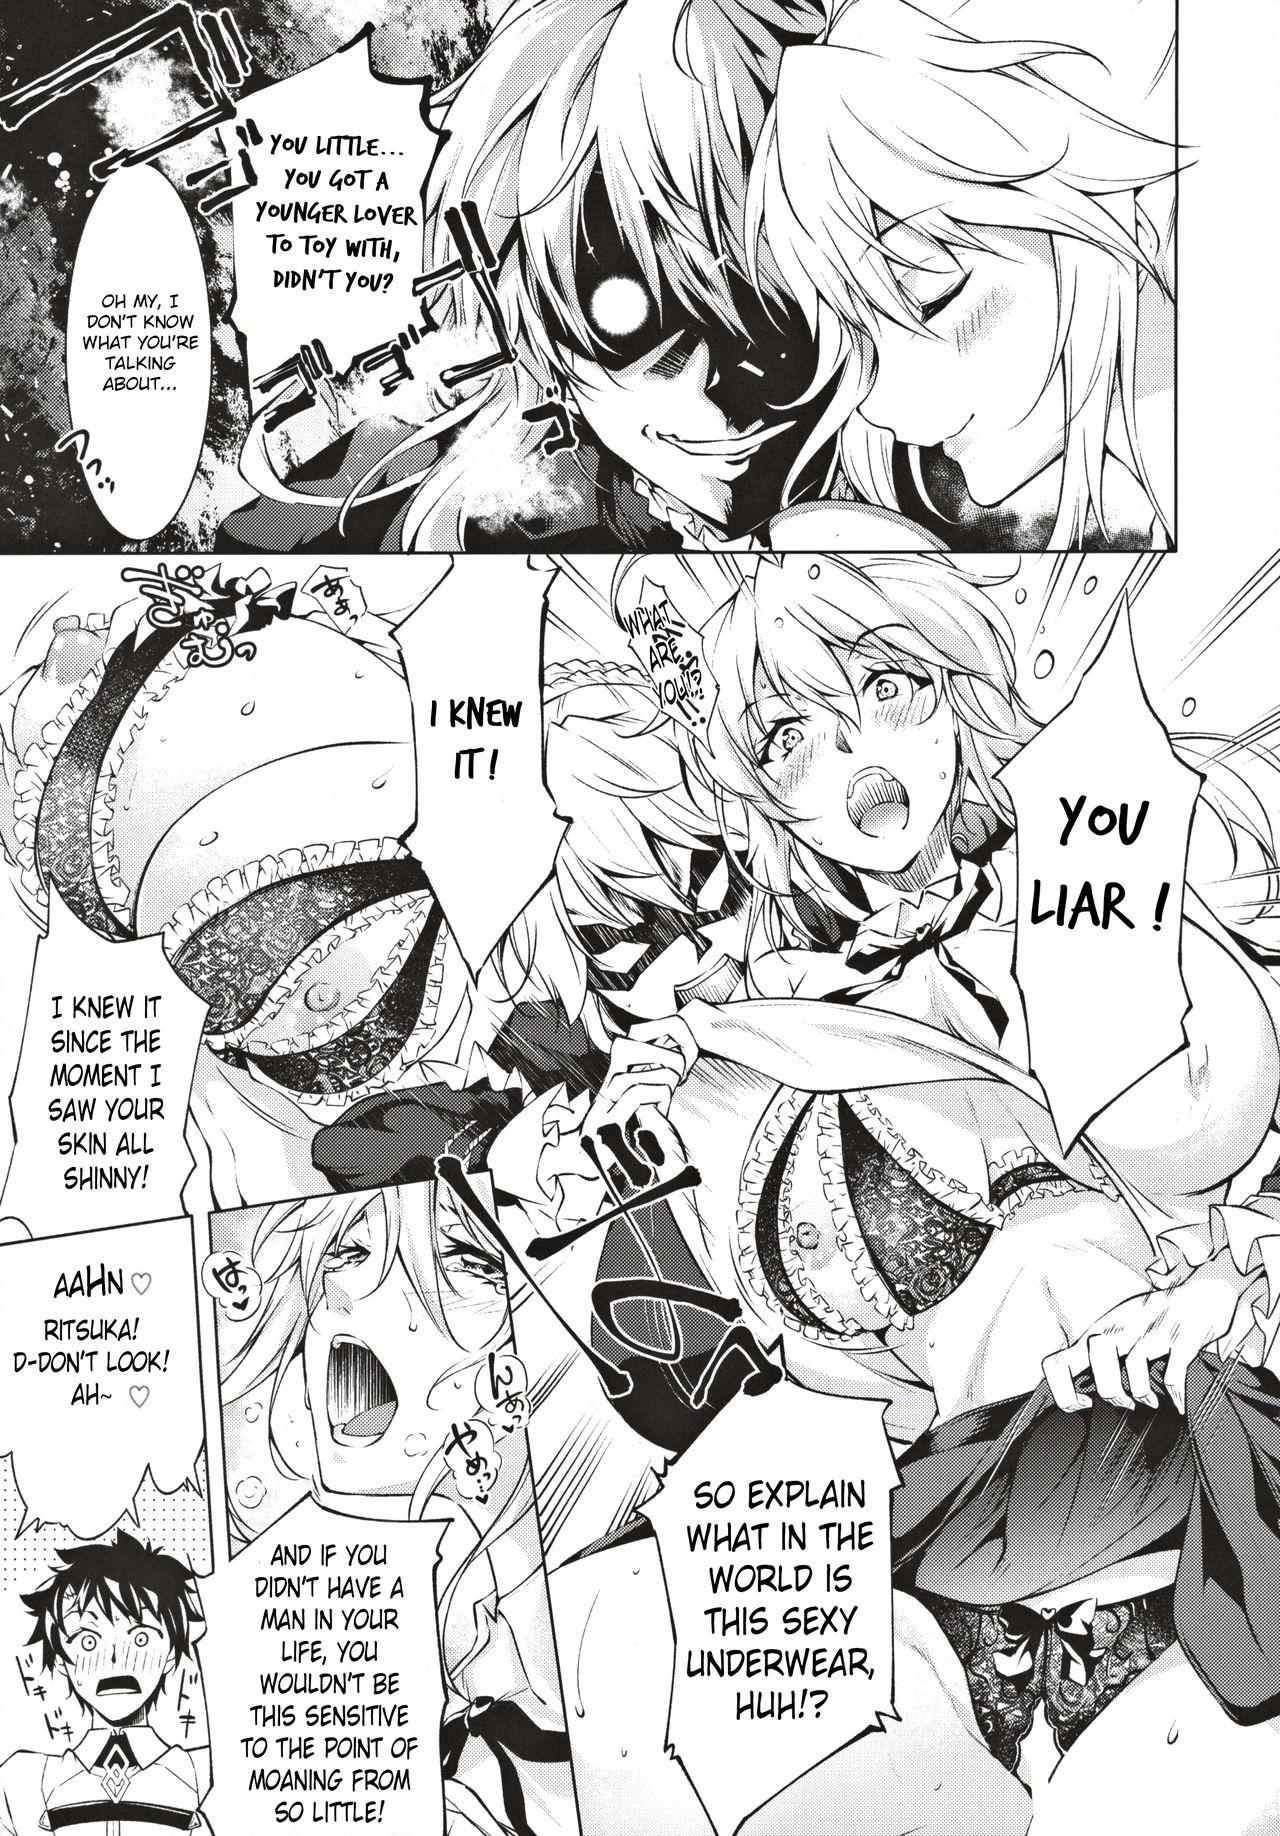 Class Pendra Shimai no Seijijou | The Pendragon twin sisters' sexual situation - Fate grand order Gay Pawnshop - Page 6